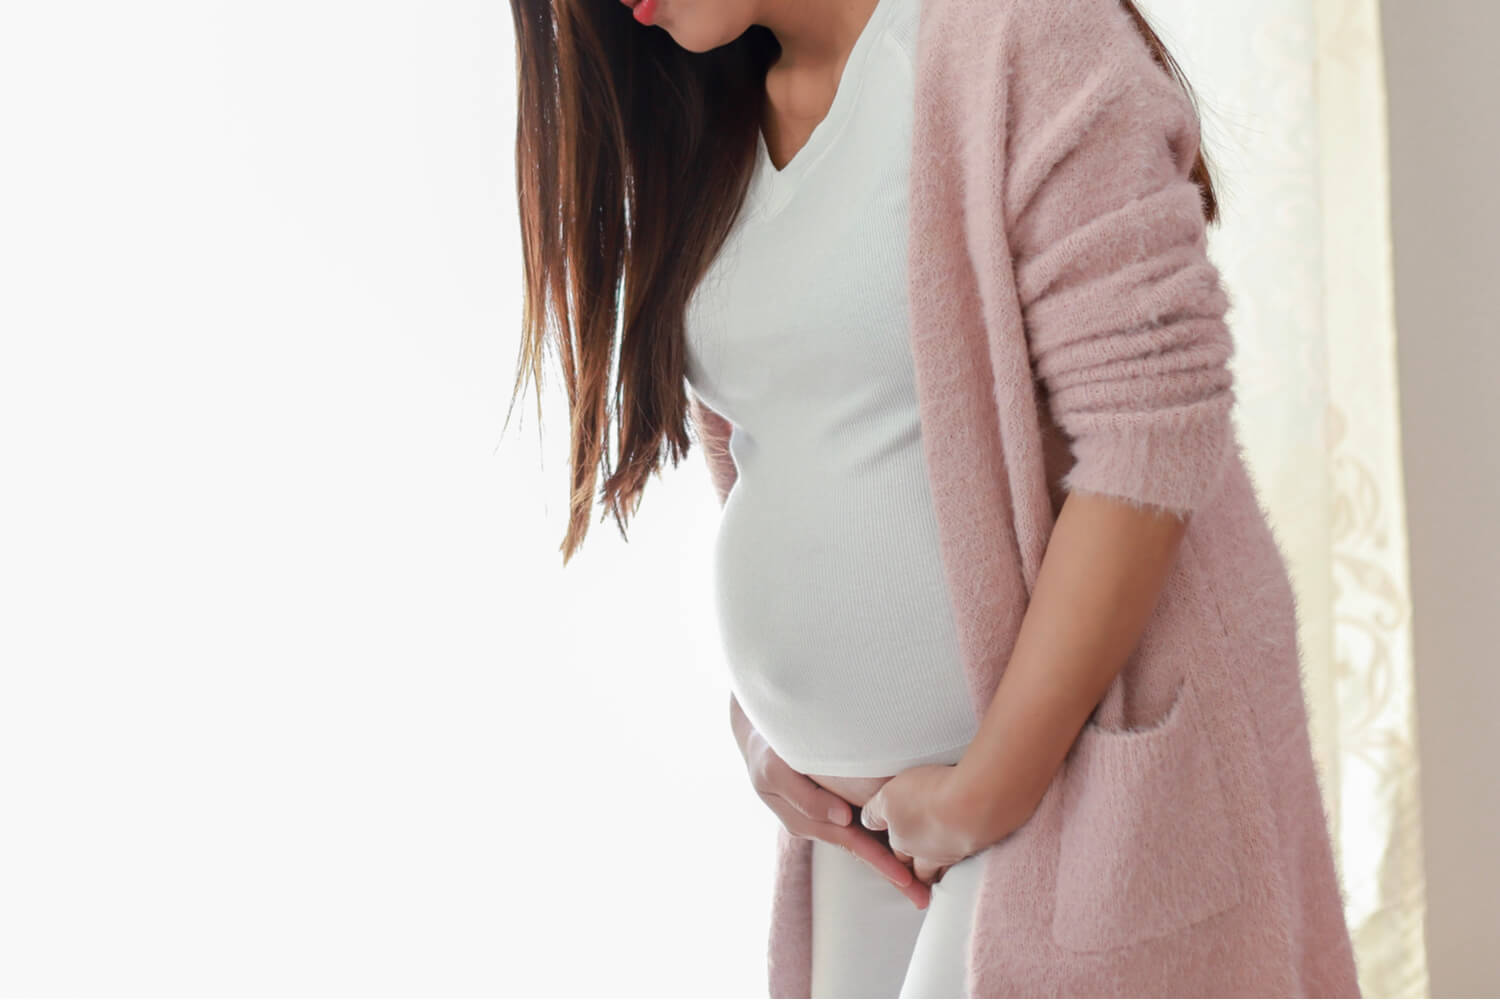 Frequent Urination in pregnant women